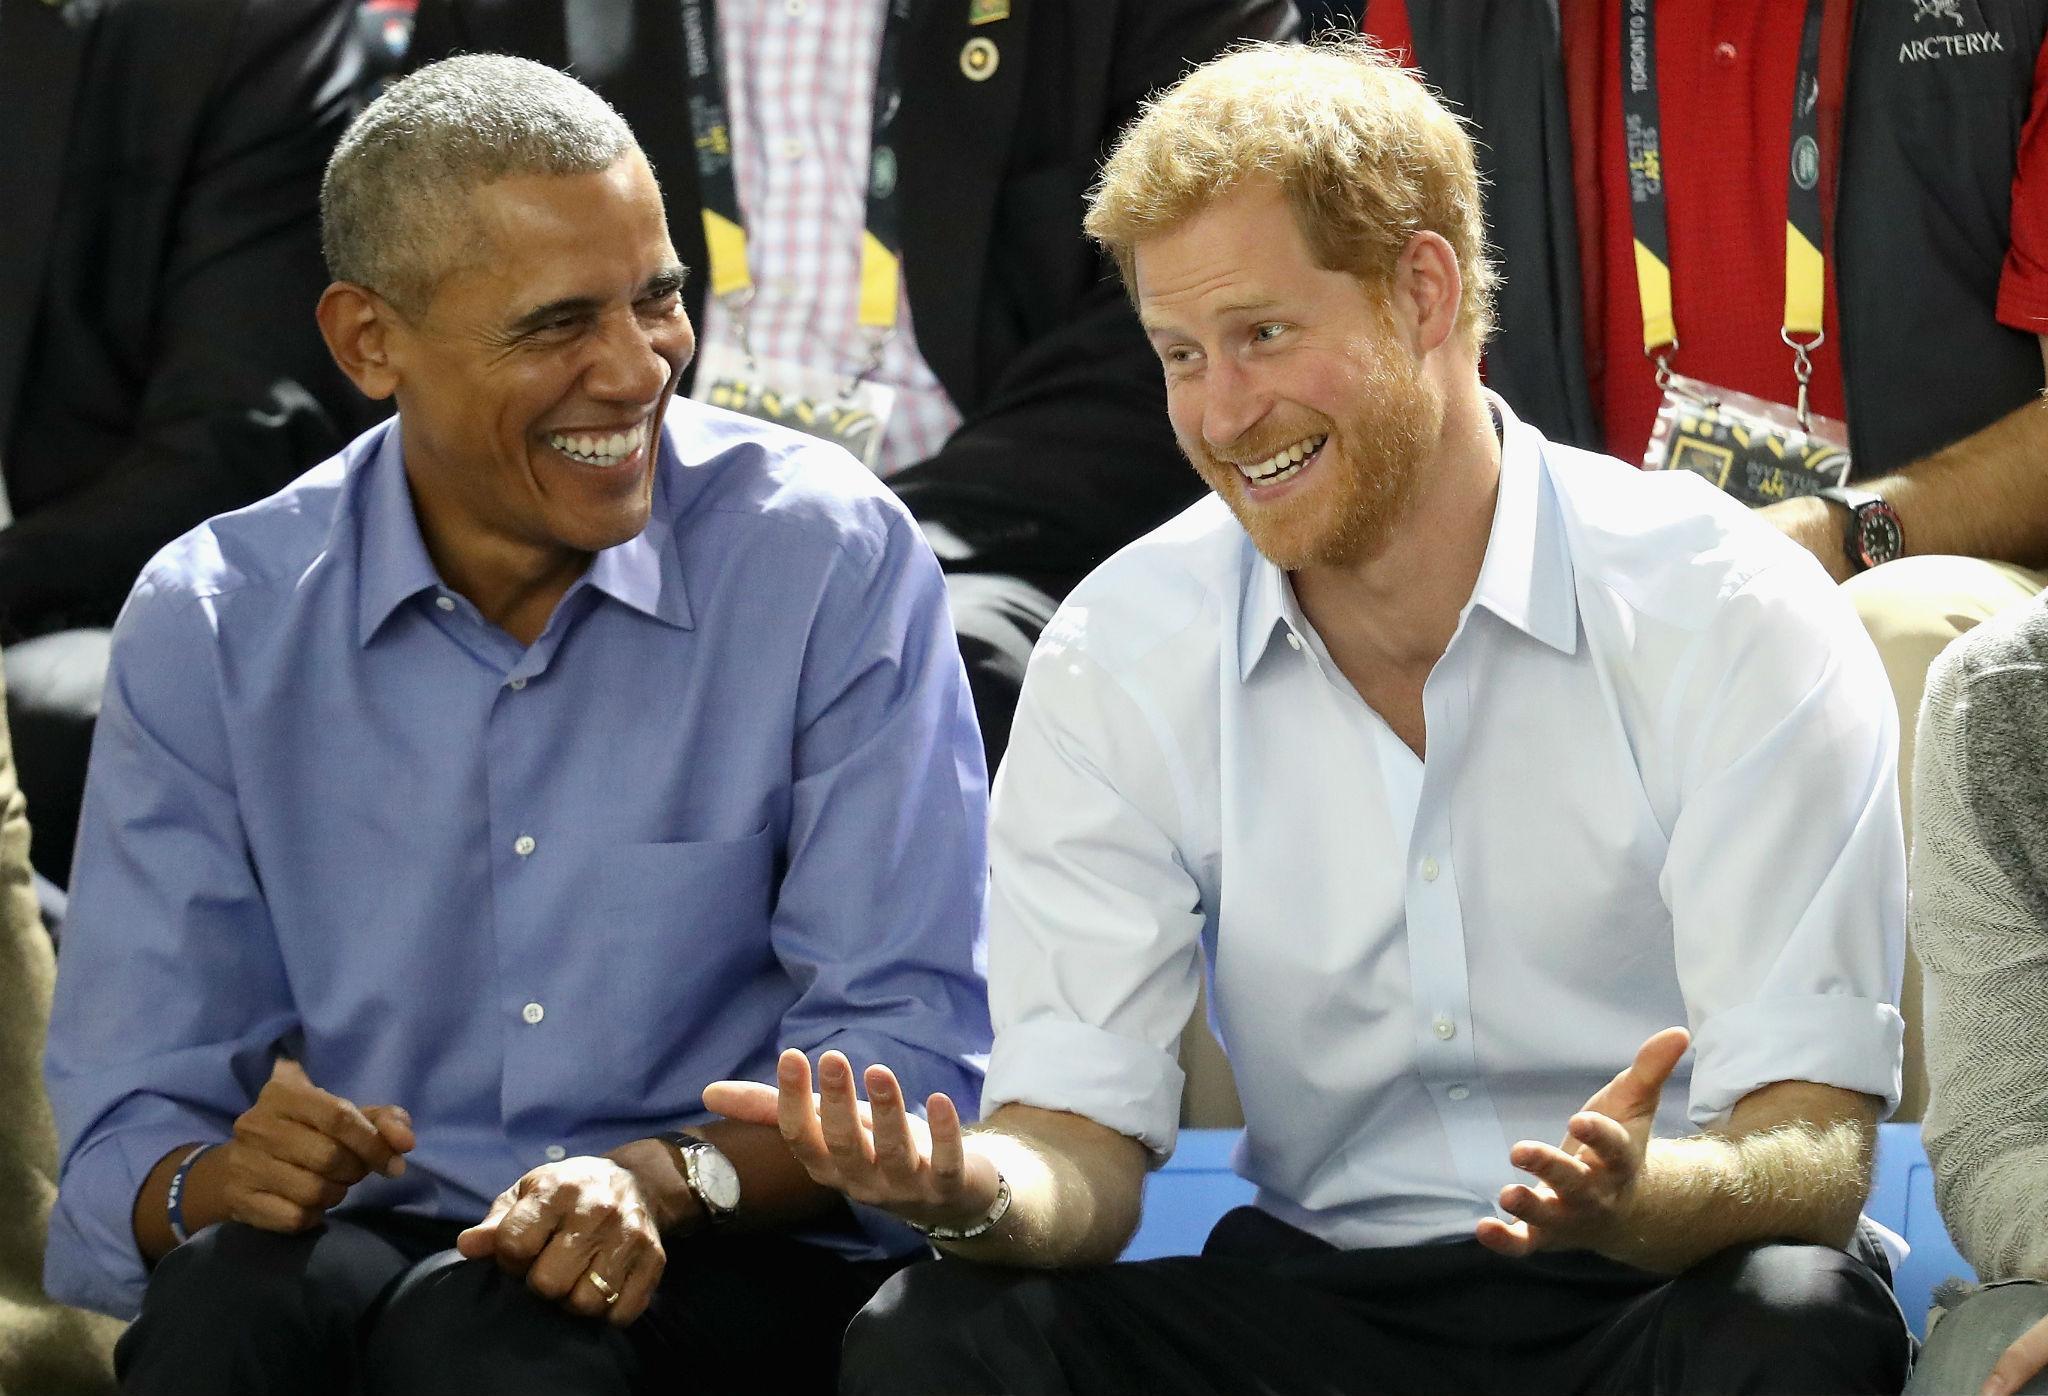 Former US President Barack Obama and Prince Harry share a joke as they watch wheelchair basketball on day 7 of the Invictus Games 2017 on September 29, 2017 in Toronto, Canada